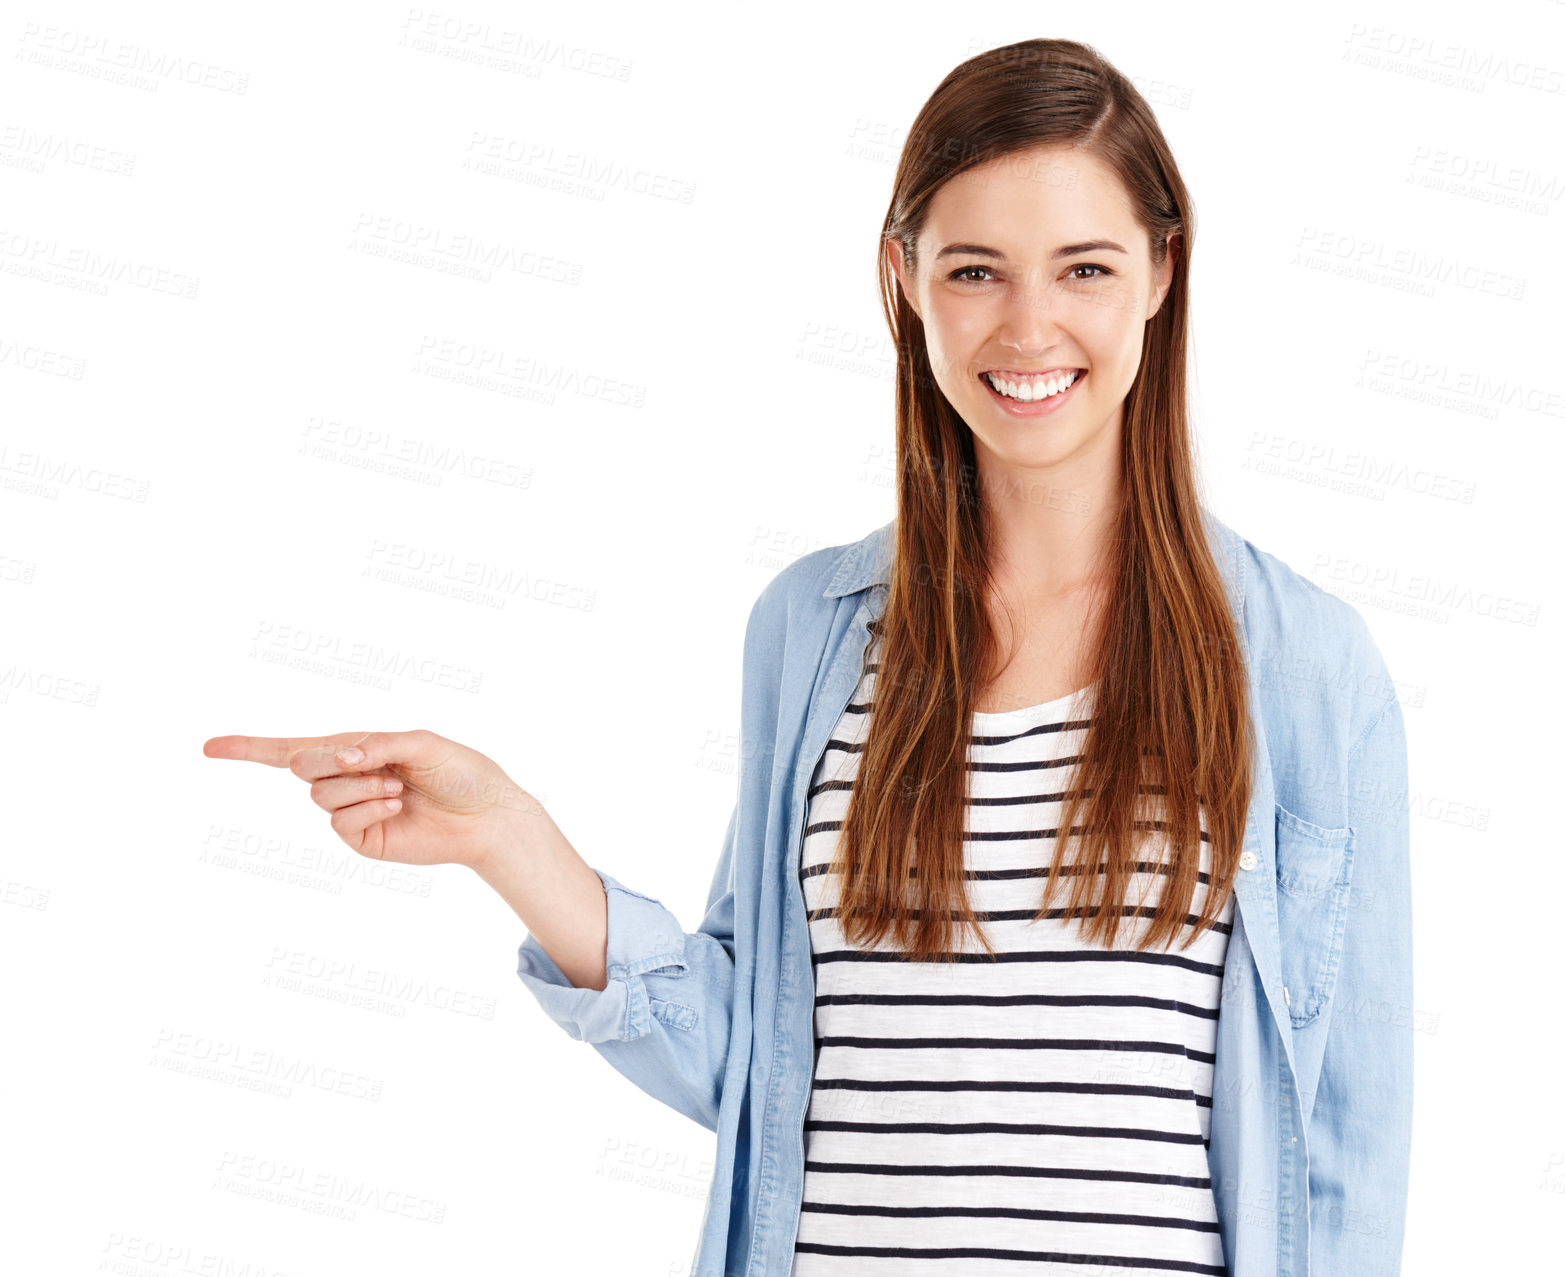 Buy stock photo Studio shot of a beautiful young woman pointing towards copyspace against a white background 